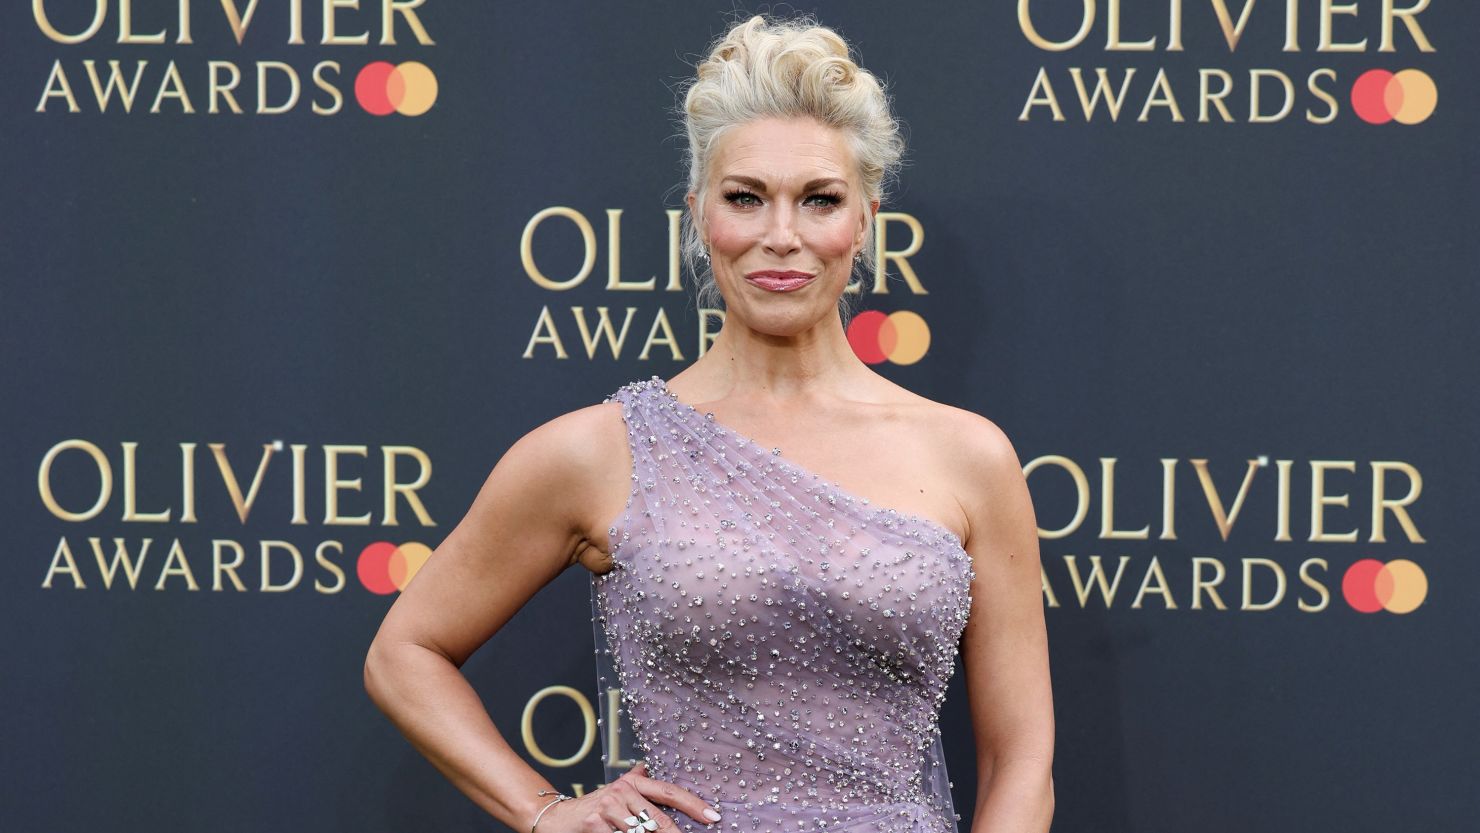 Hannah Waddingham hosted this year's Olivier Awards.